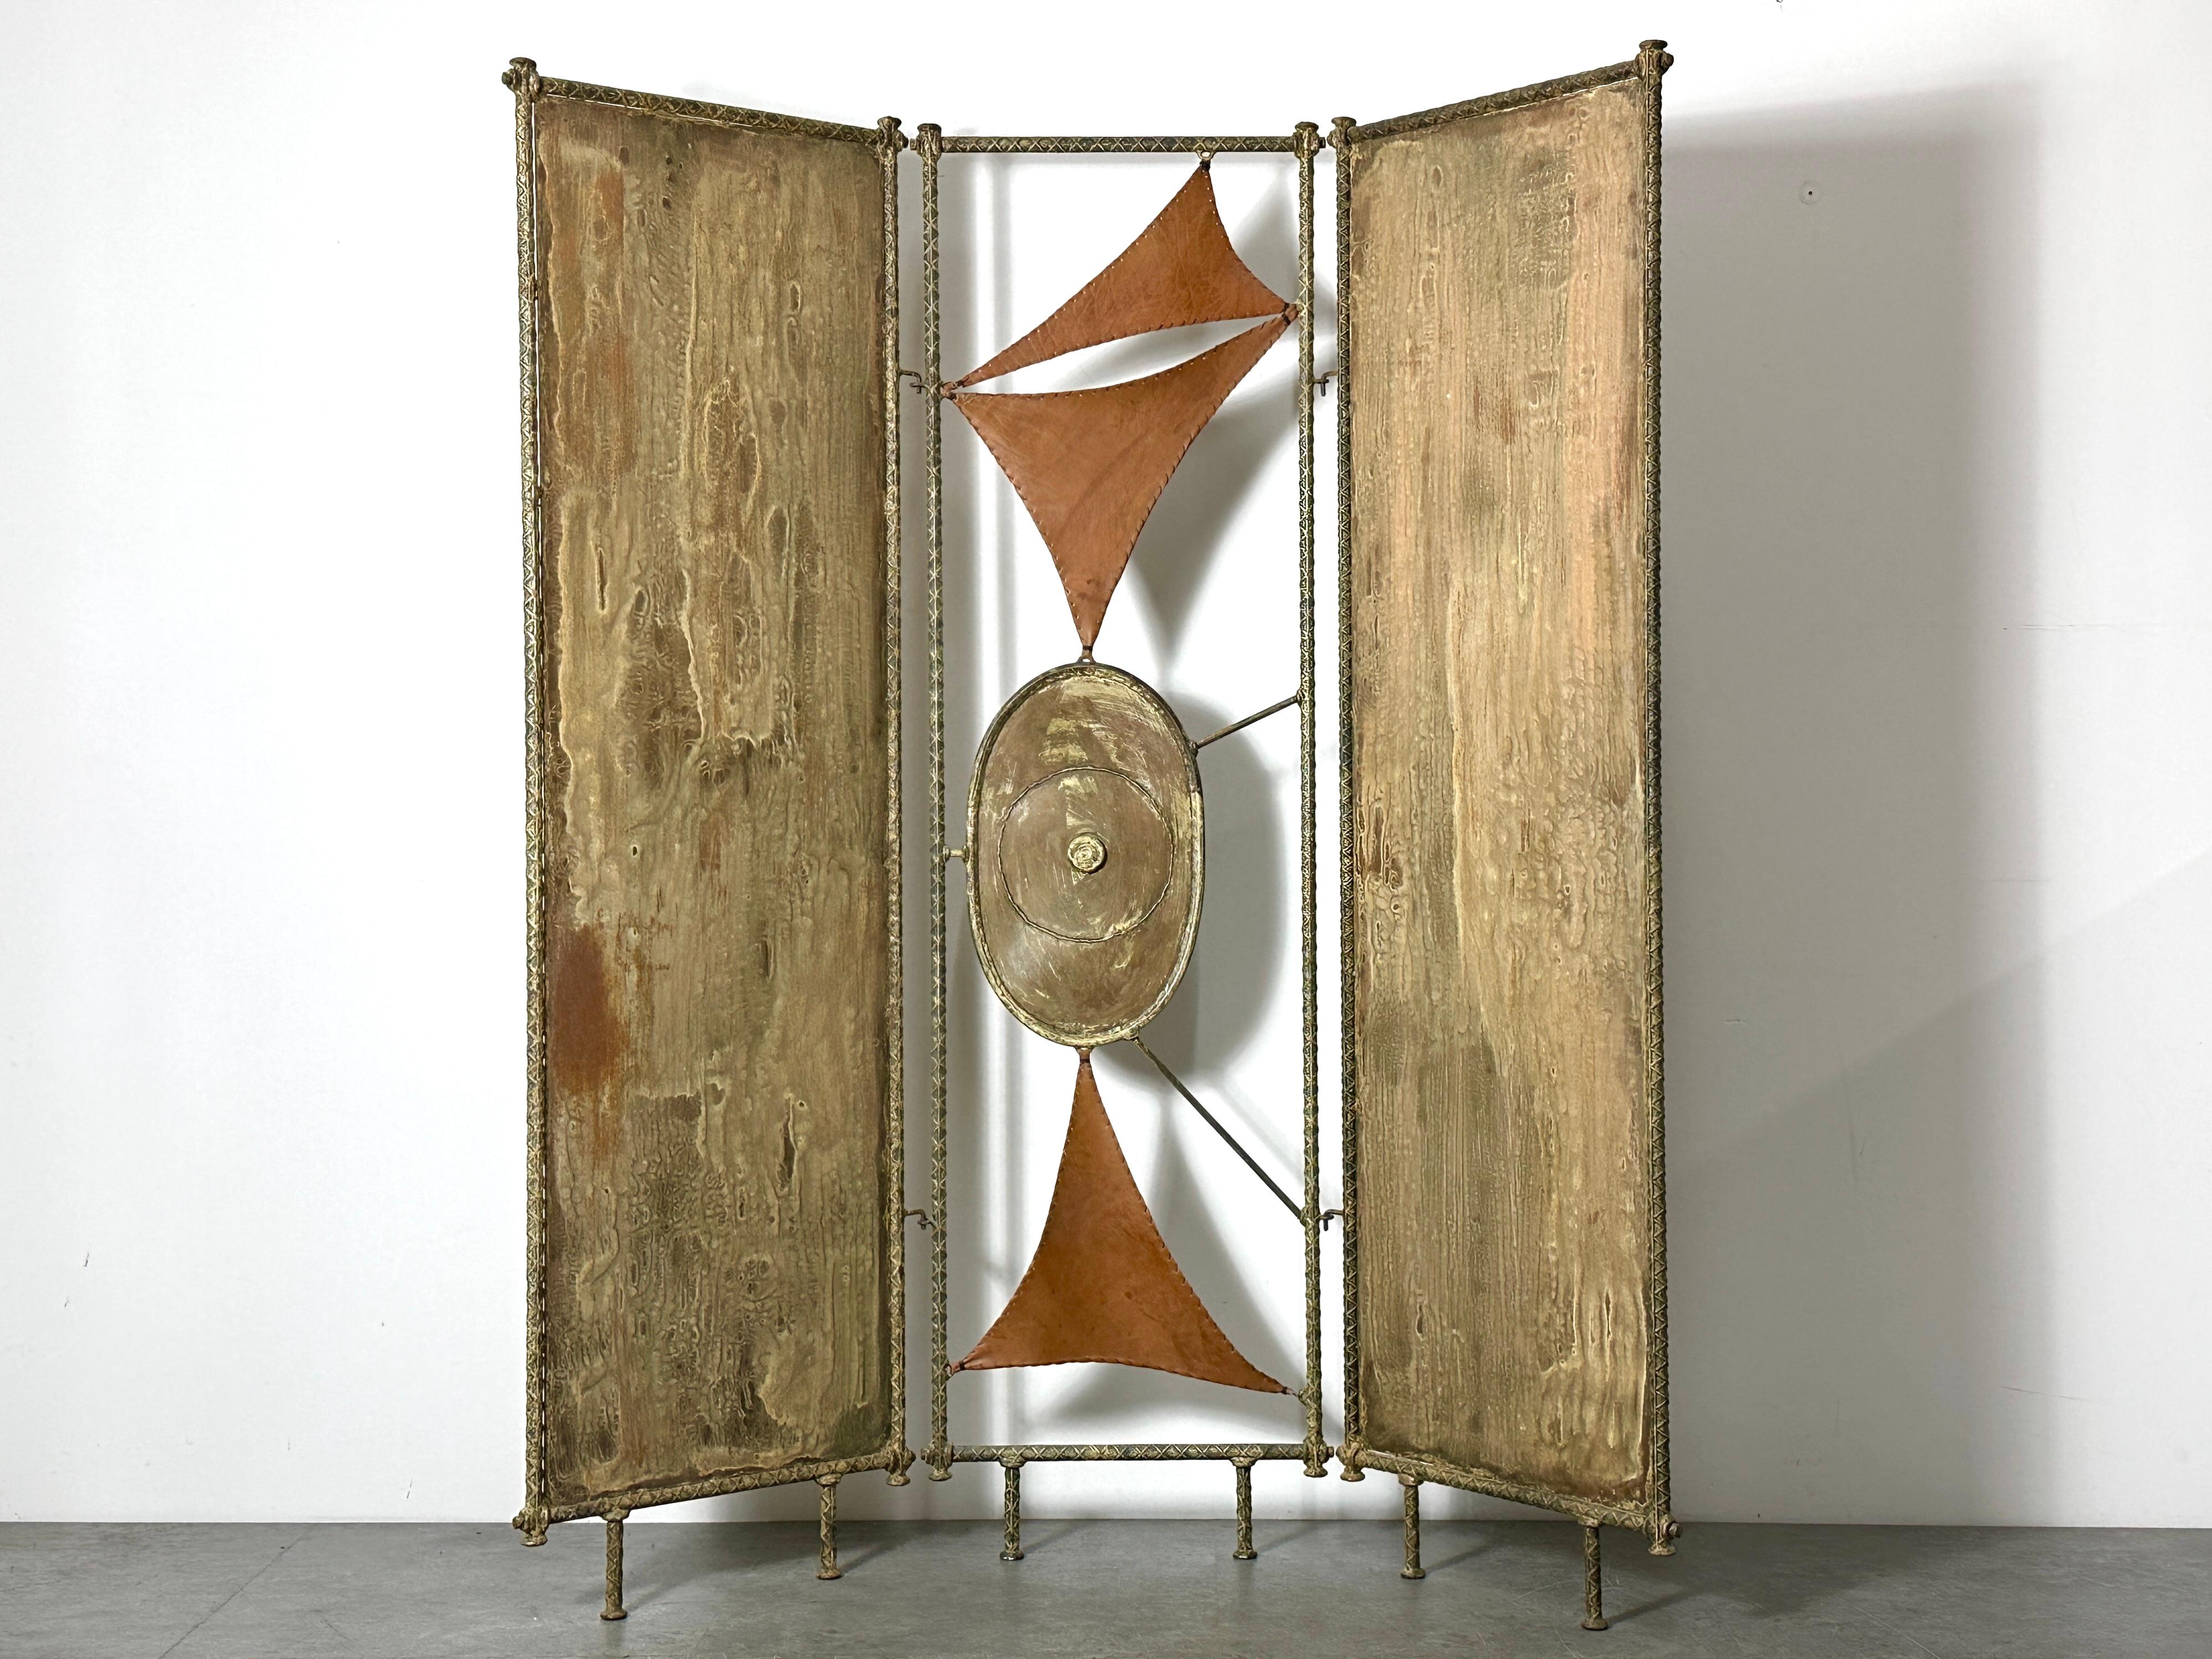 Exceptional one of a kind artist made room divider circa 1970s
Patinated steel three panel hinged design with modernist hand stitched leather detail and sculptural welded center piece
Presumably made by a Detroit area or Cranbrook artist

